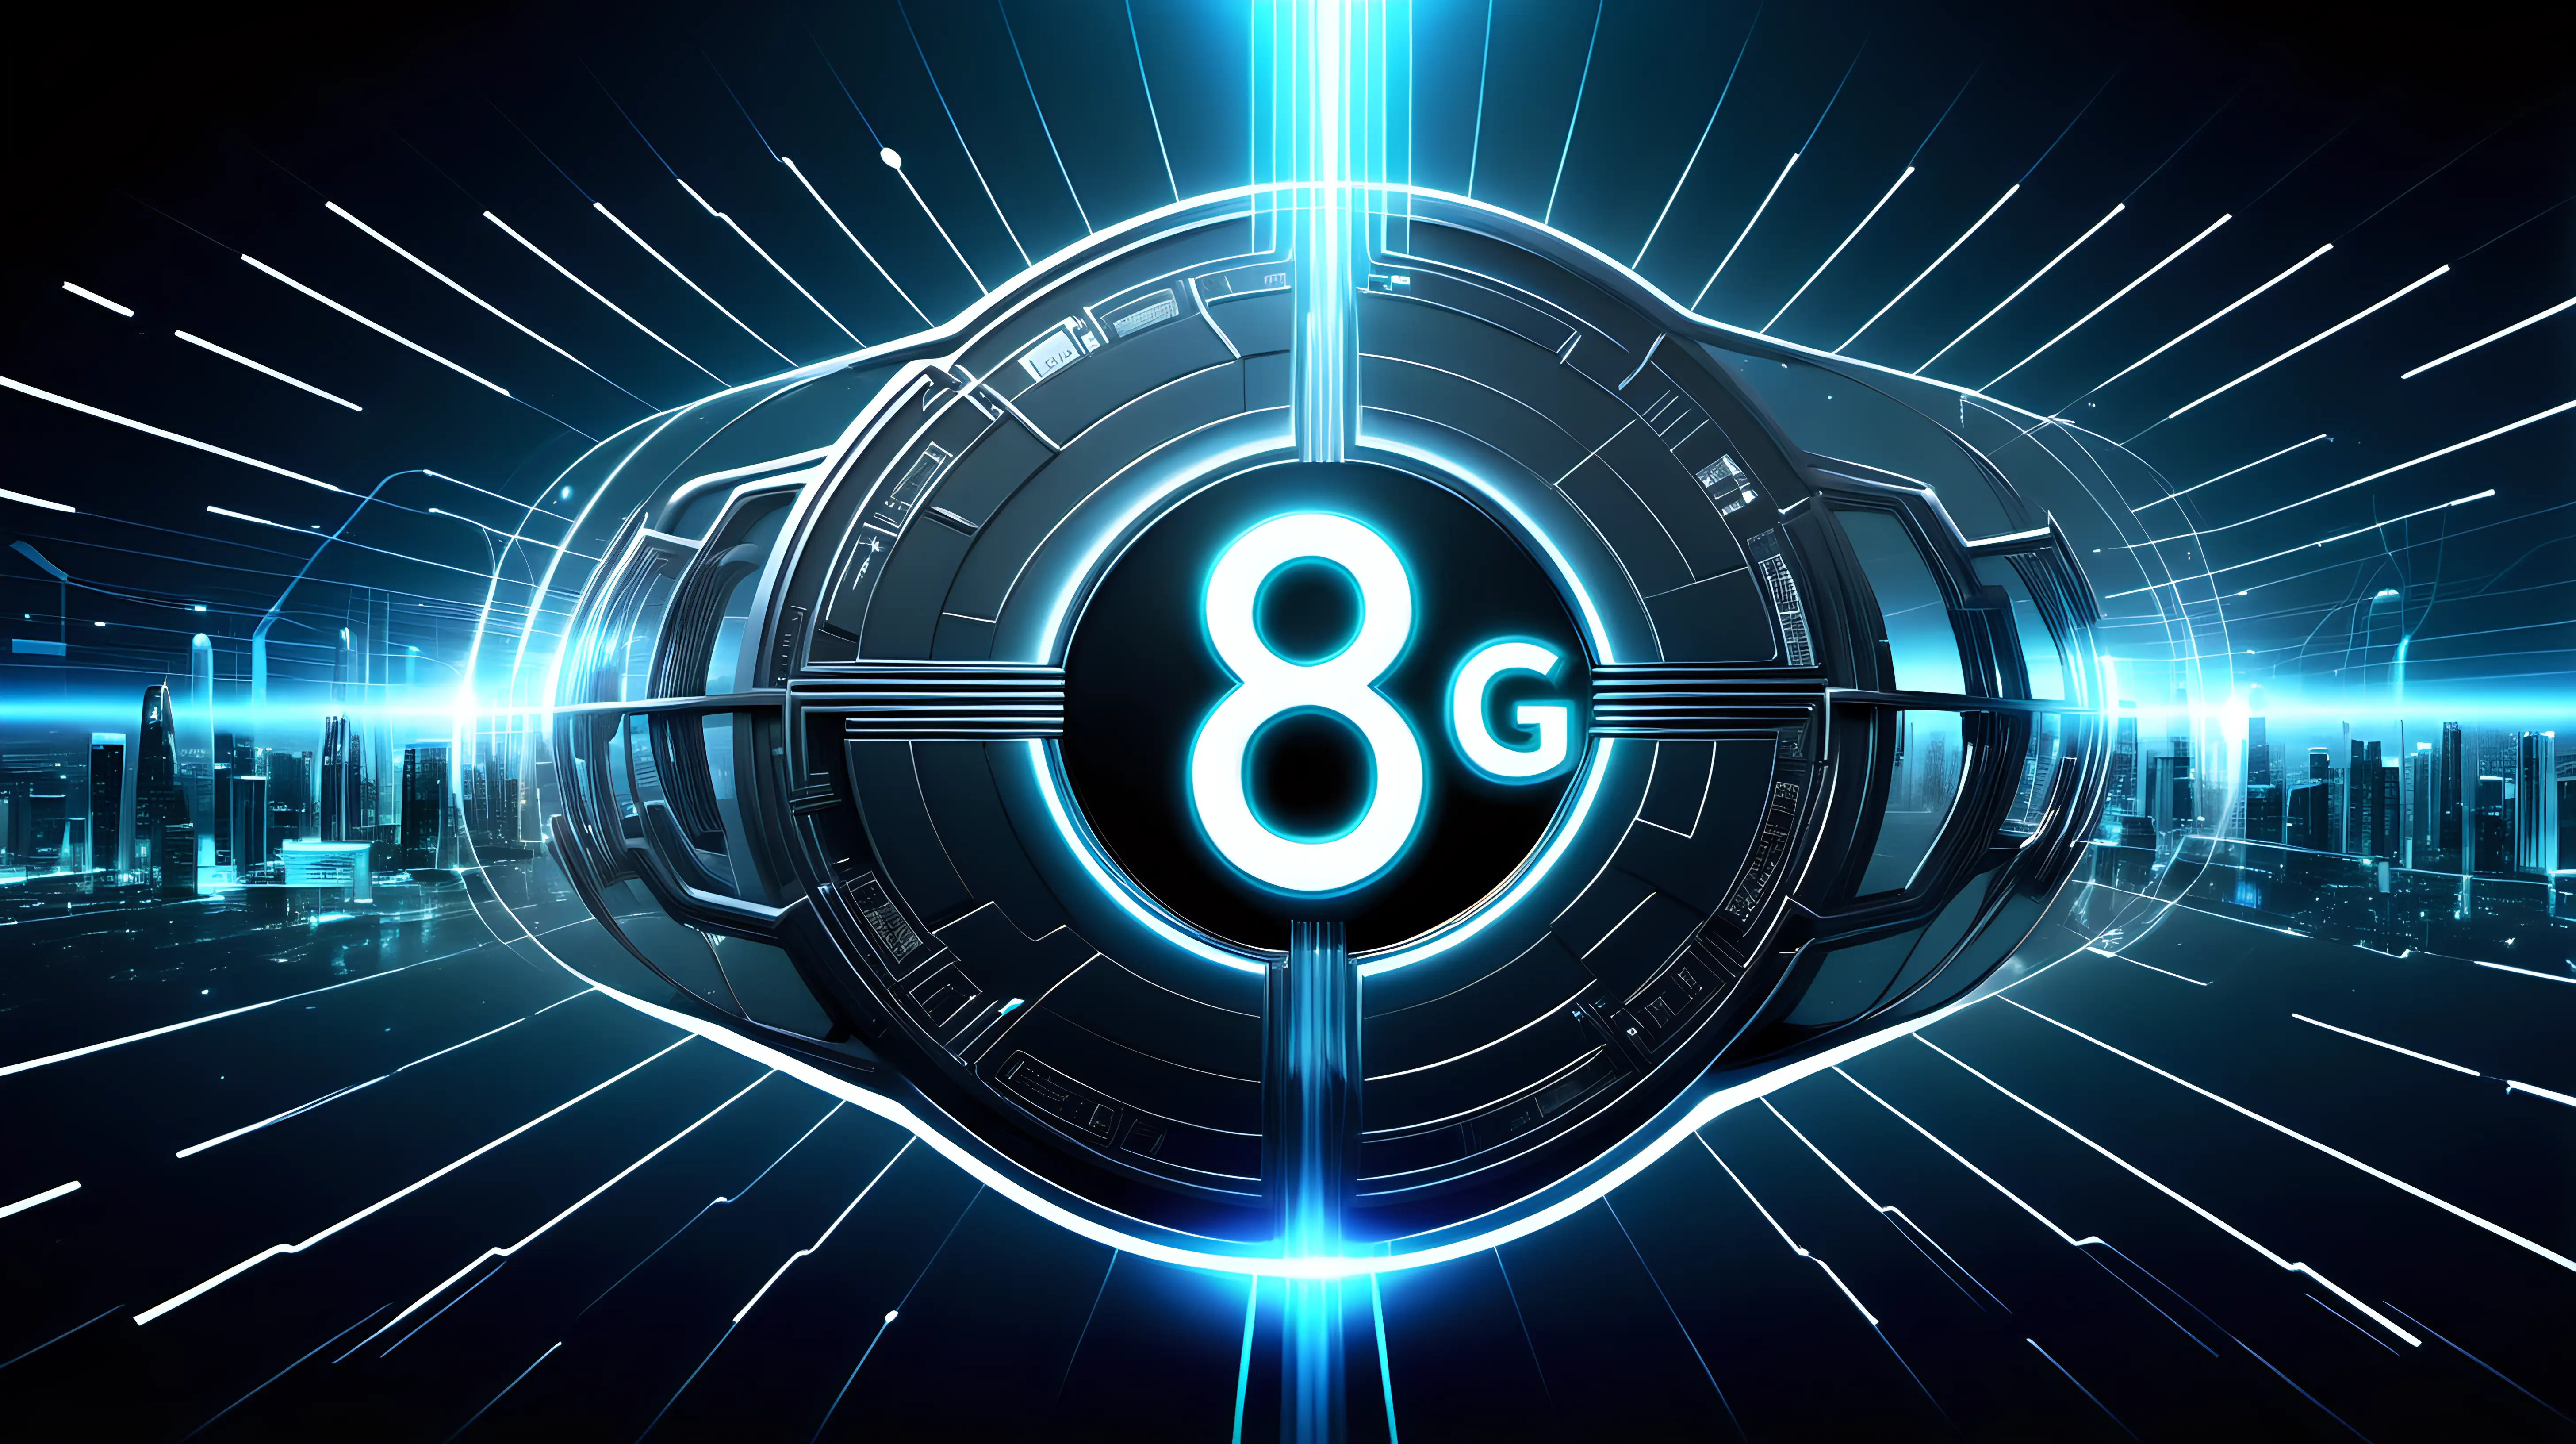 A visually captivating image showcasing the next level of connectivity with 8G, with the central "8G" symbol radiating light and energy in a futuristic setting.